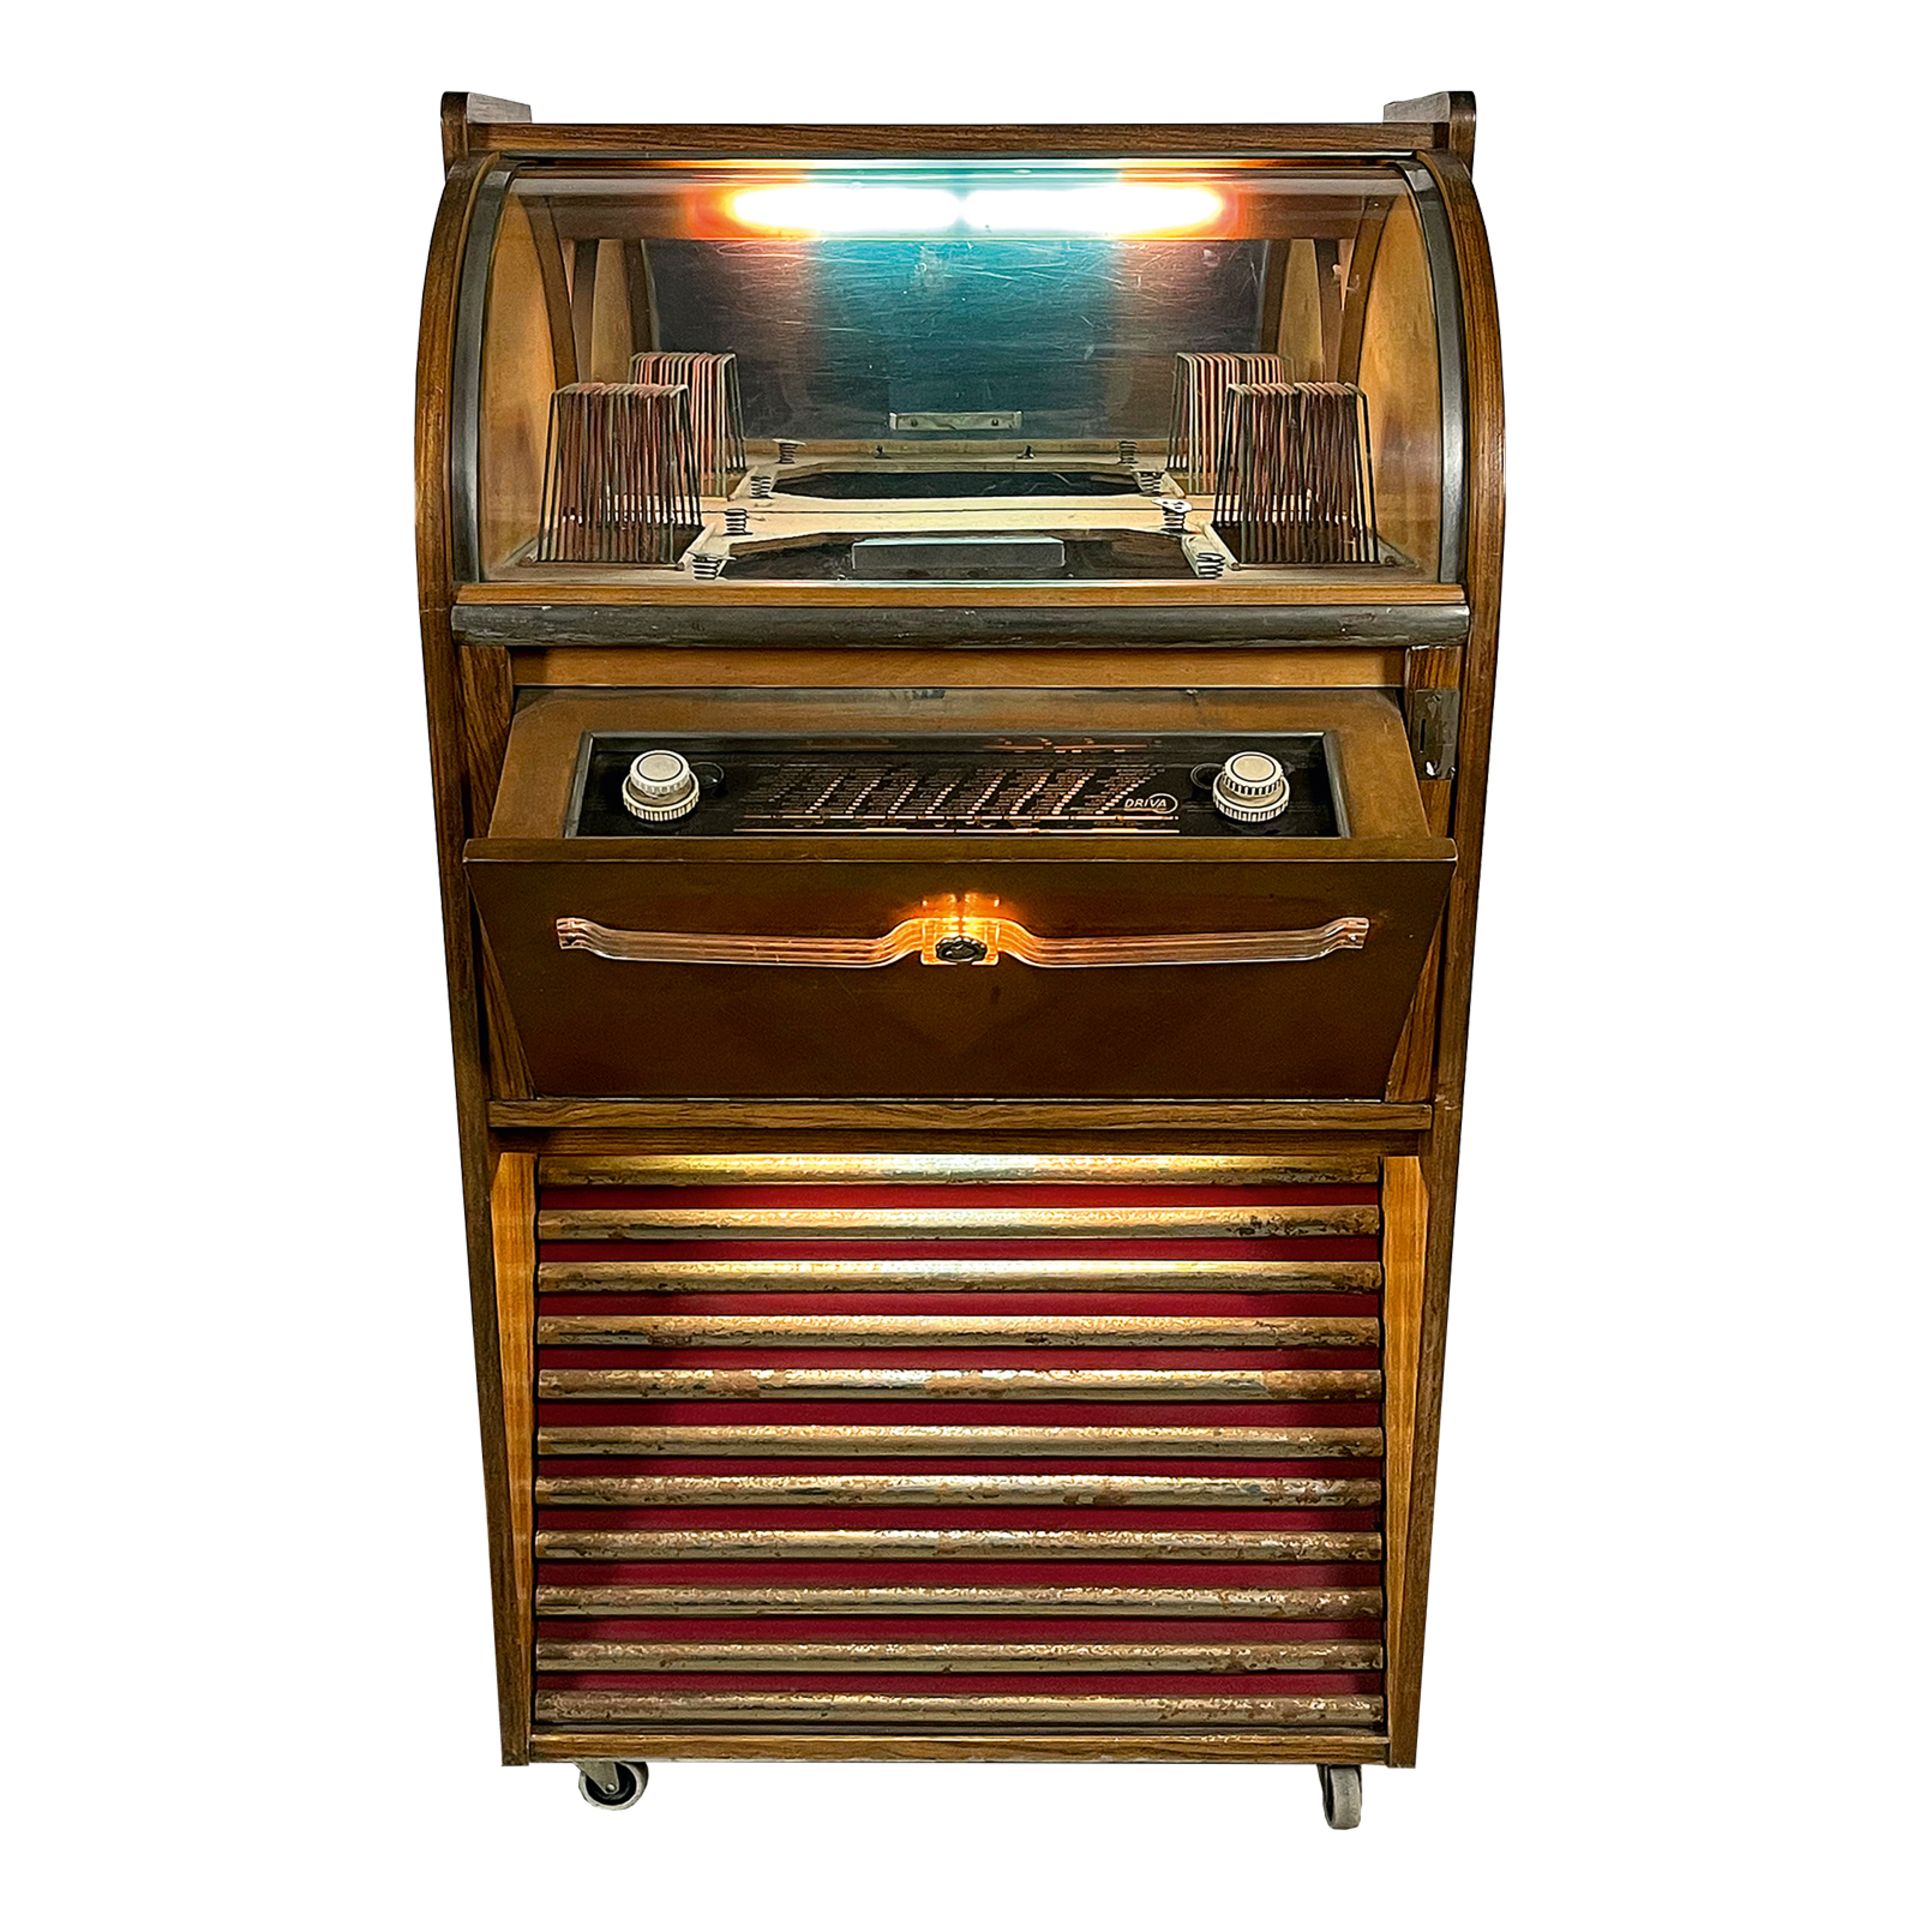 1958 Belgian Driva "Brabant Box" Coin-Op Radio and Record Player Jukebox